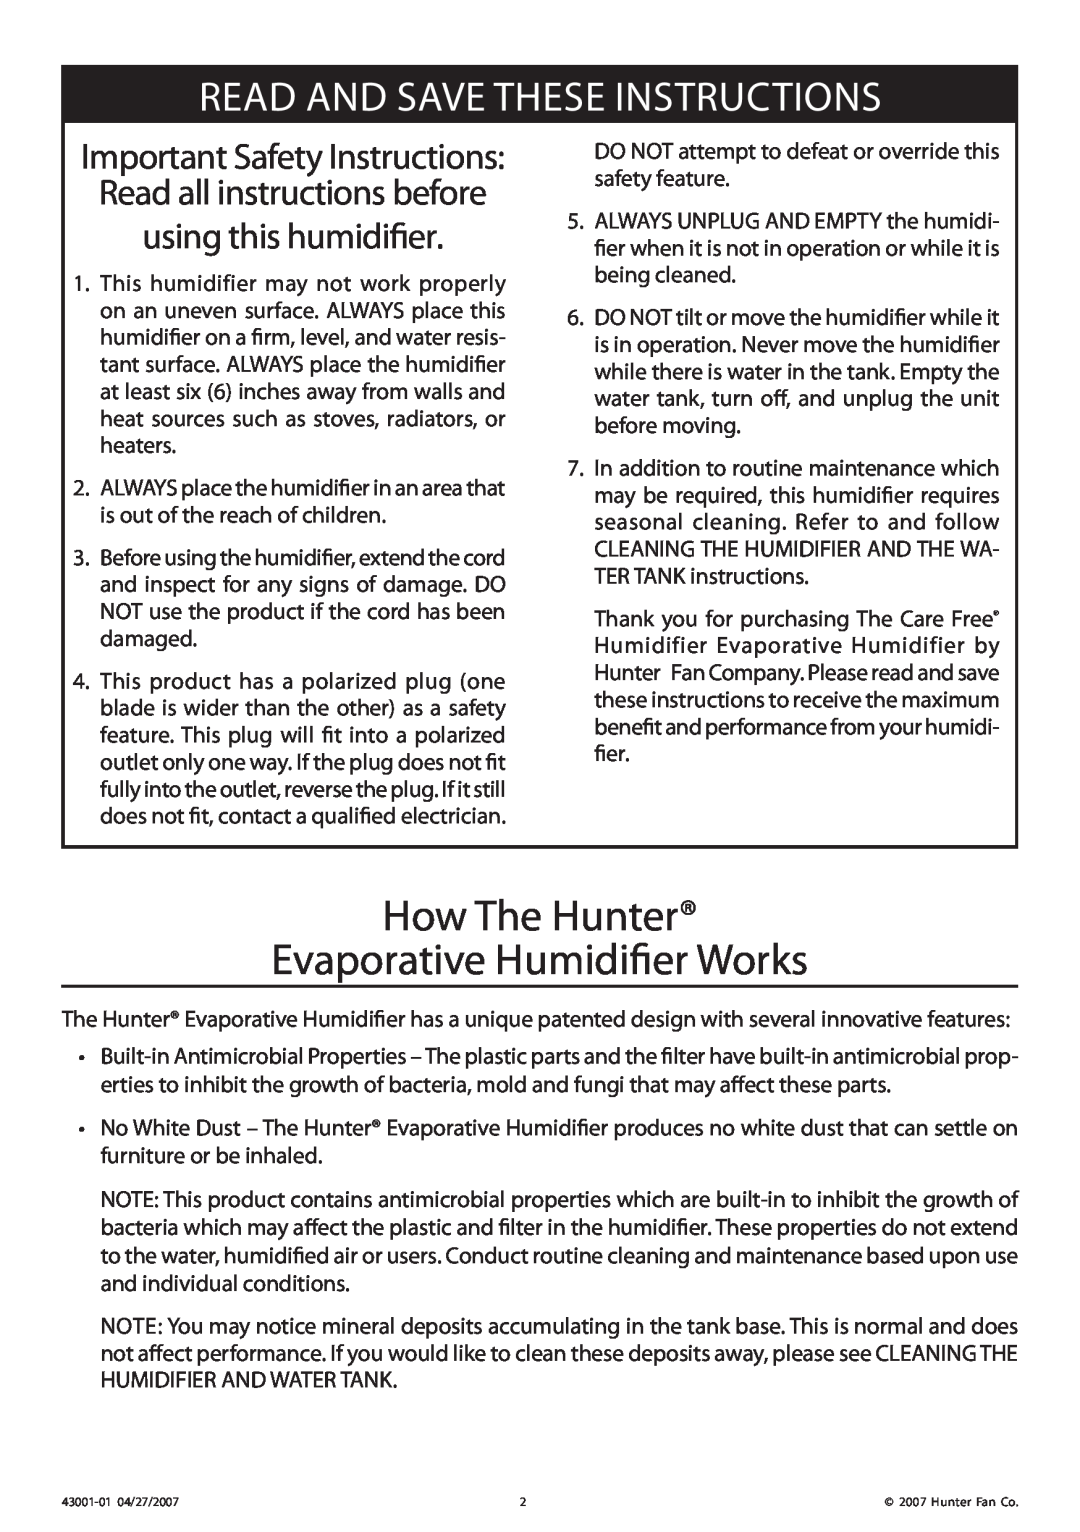 Hunter Fan 32200 How The Hunter Evaporative Humidifier Works, Read and Save These Instructions, using this humidifier 